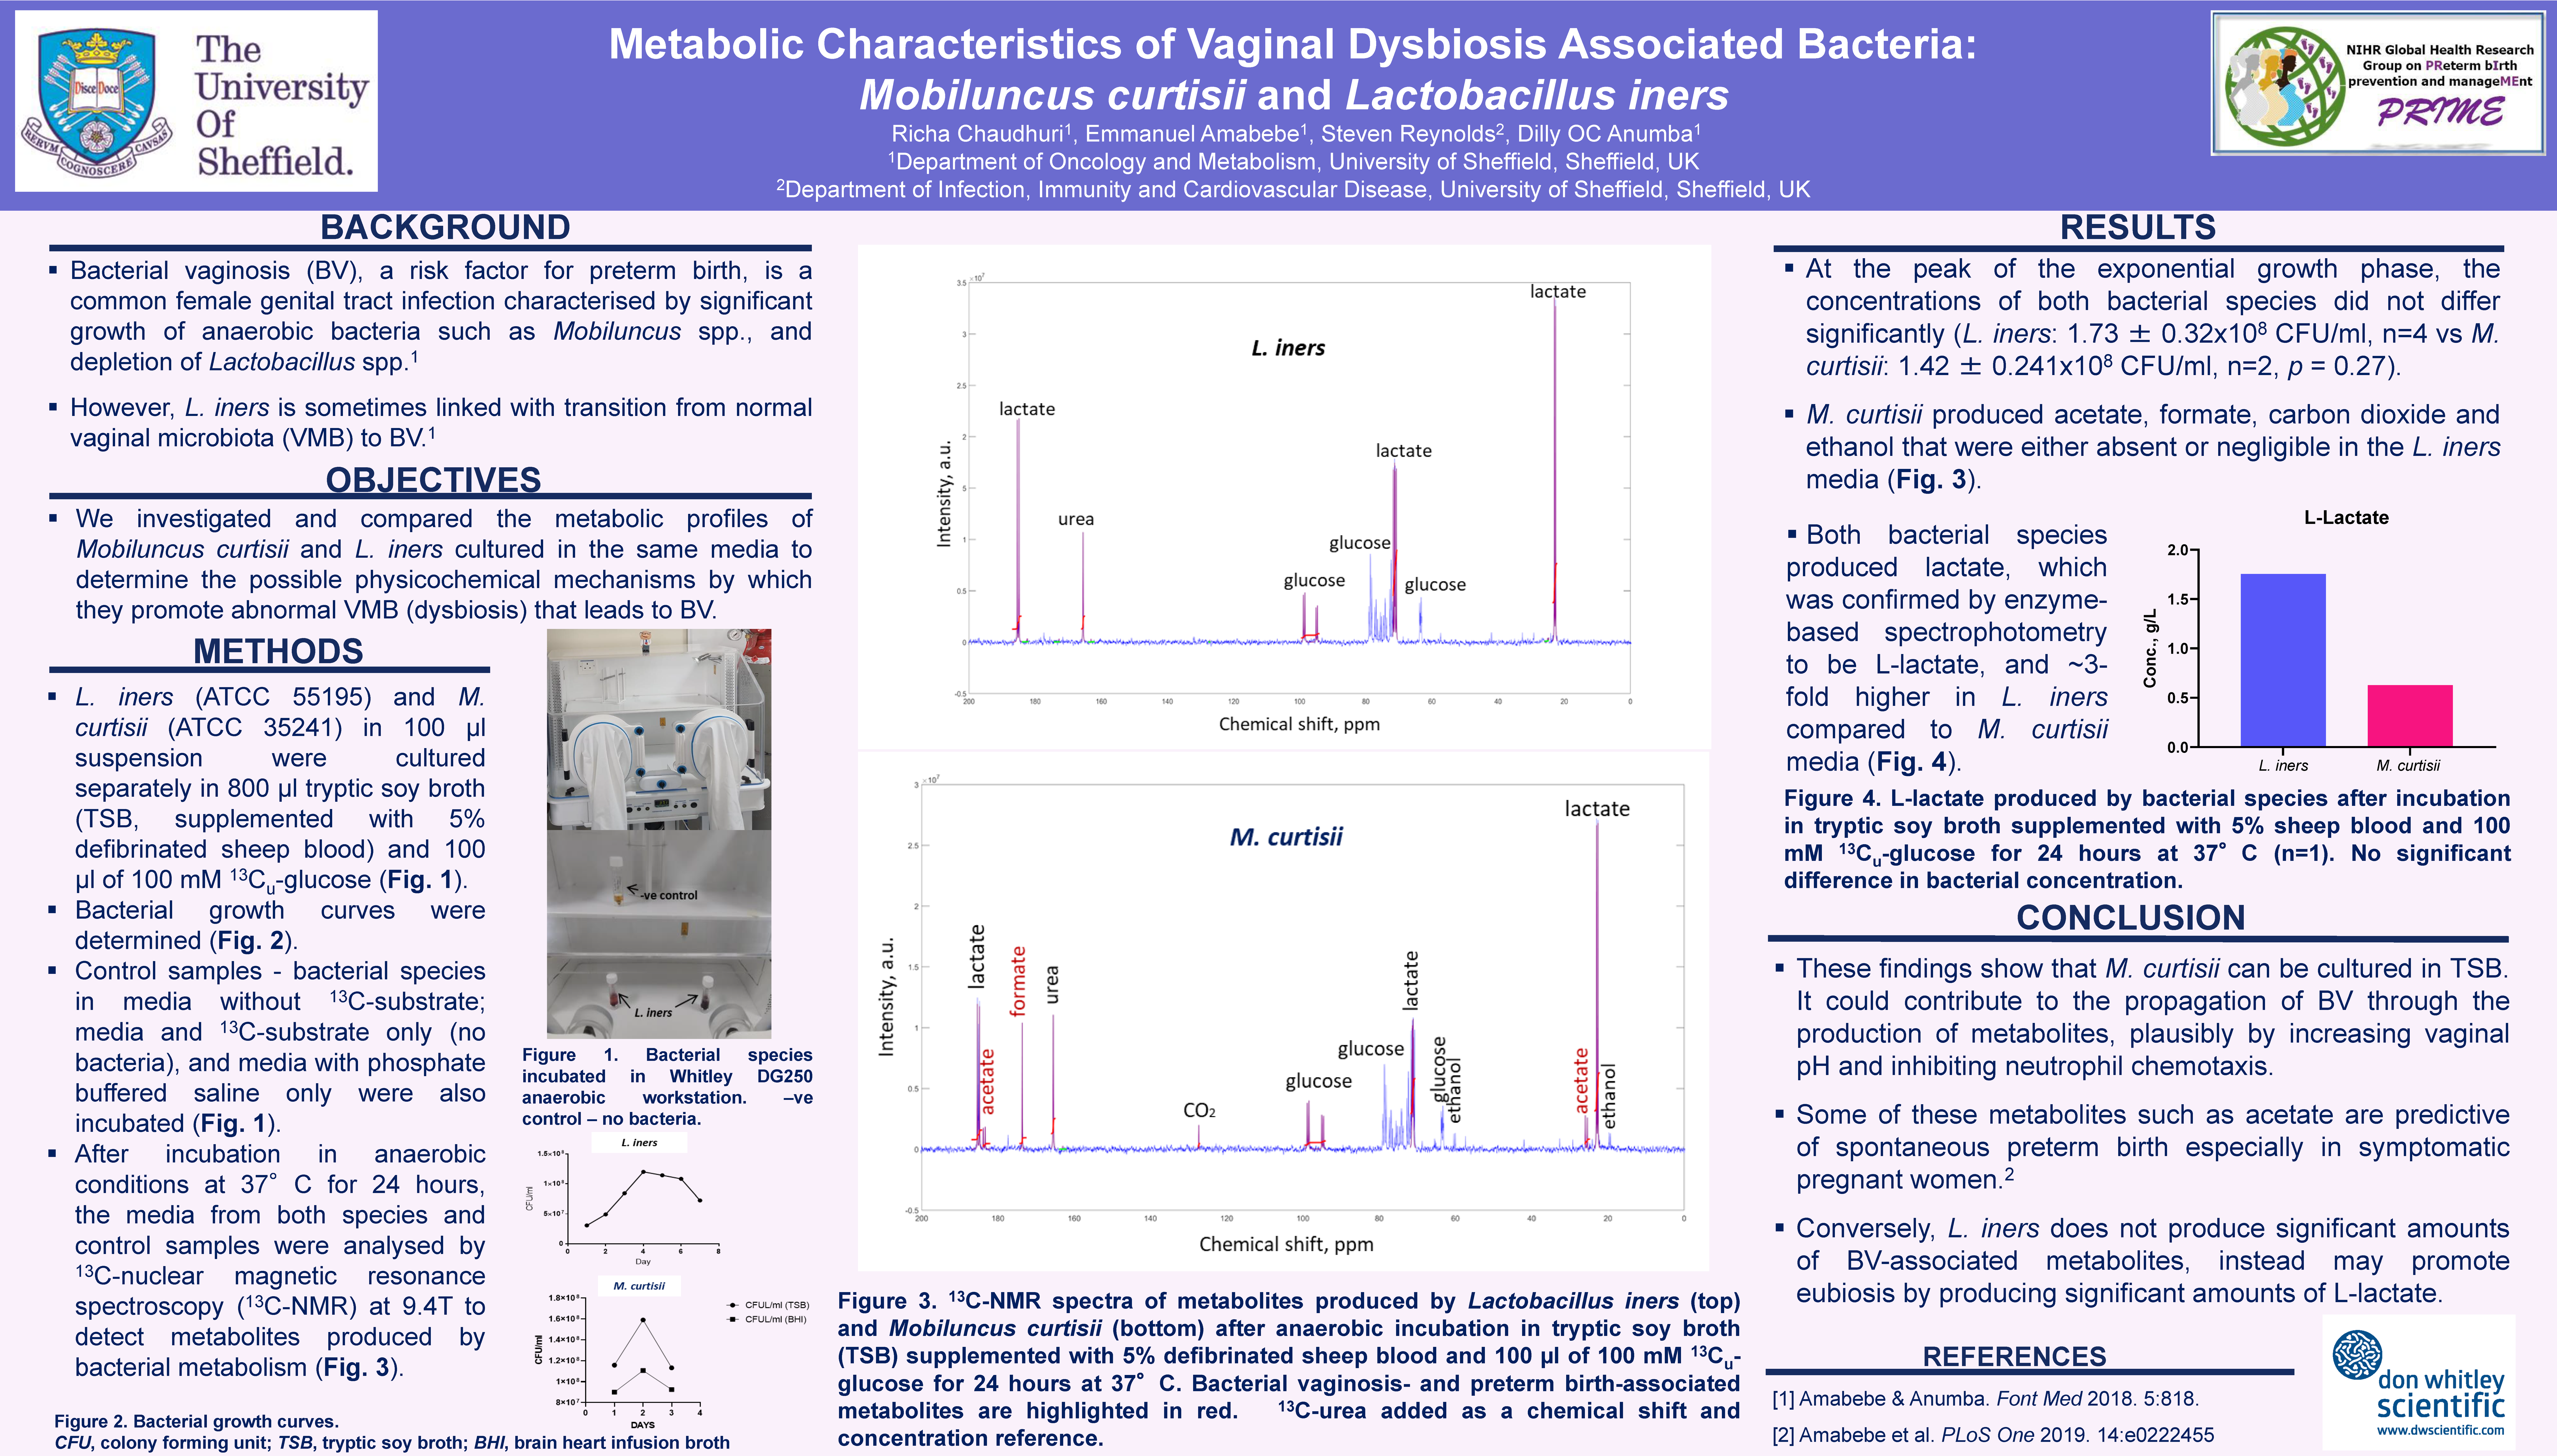 Full text of the poster Metabolic Characteristics of Vaginal Dysbiosis Associated Bacteria